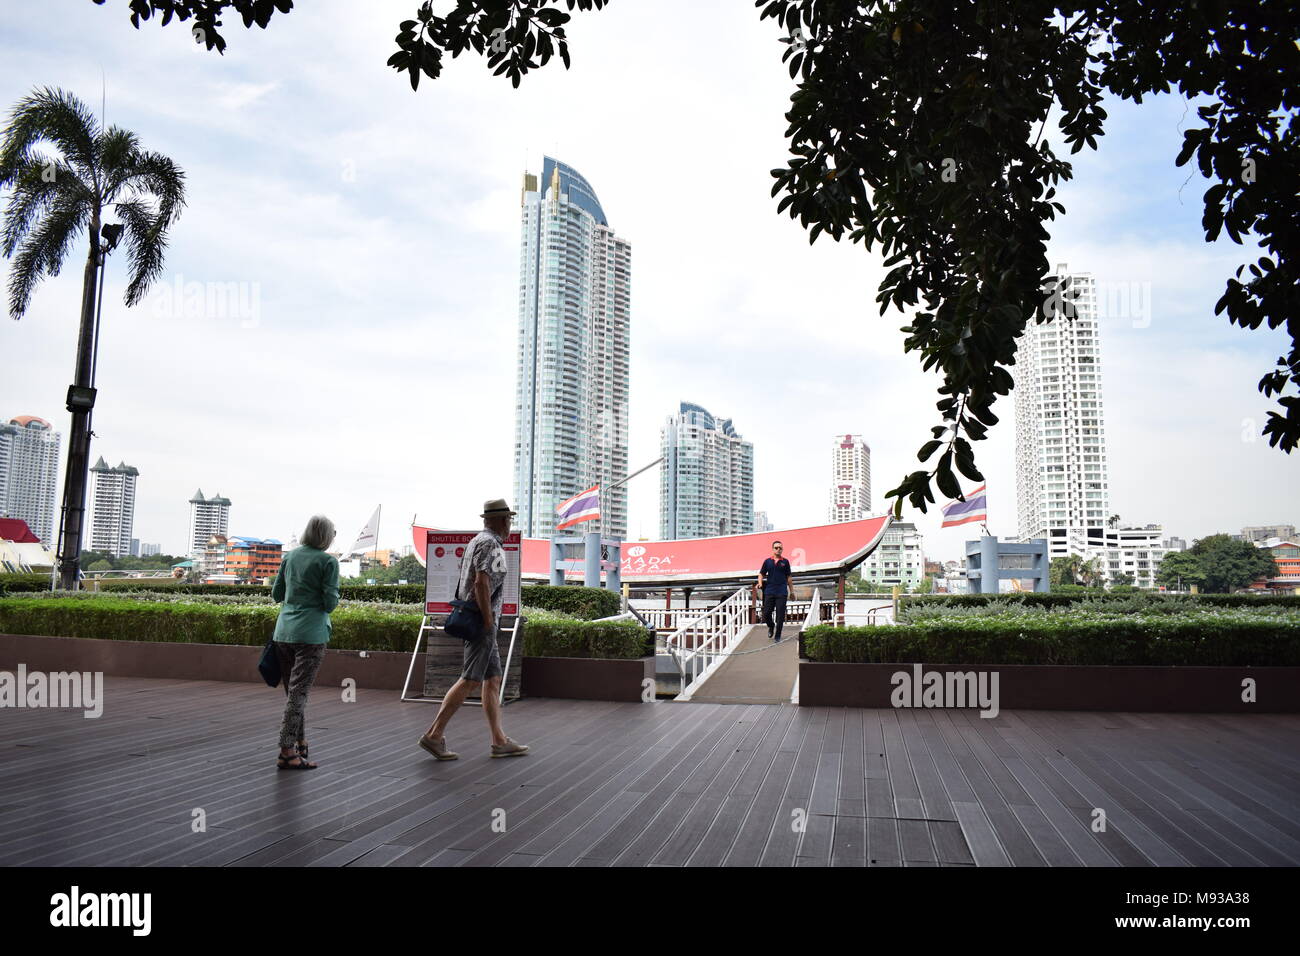 Beautiful picture of 2 tourists walking on a wooden deck before boarding on a river boat with skyscrapers in the background and trees in front. Stock Photo